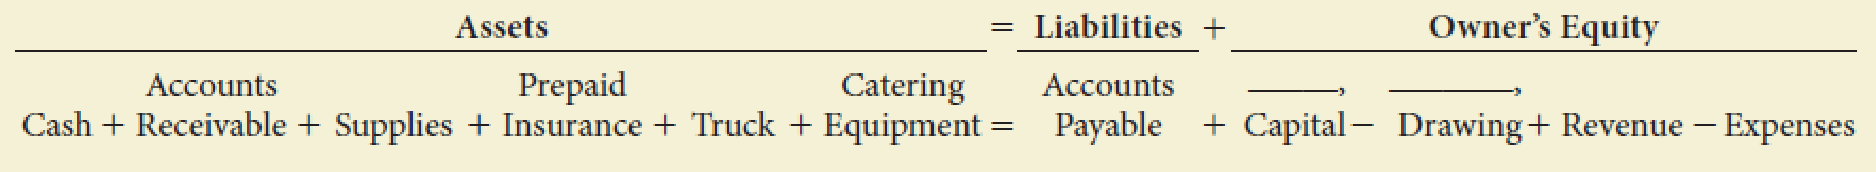 Chapter 1, Problem 4PA, On March 1 of this year, B. Gervais established Gervais Catering Service. The account headings are 